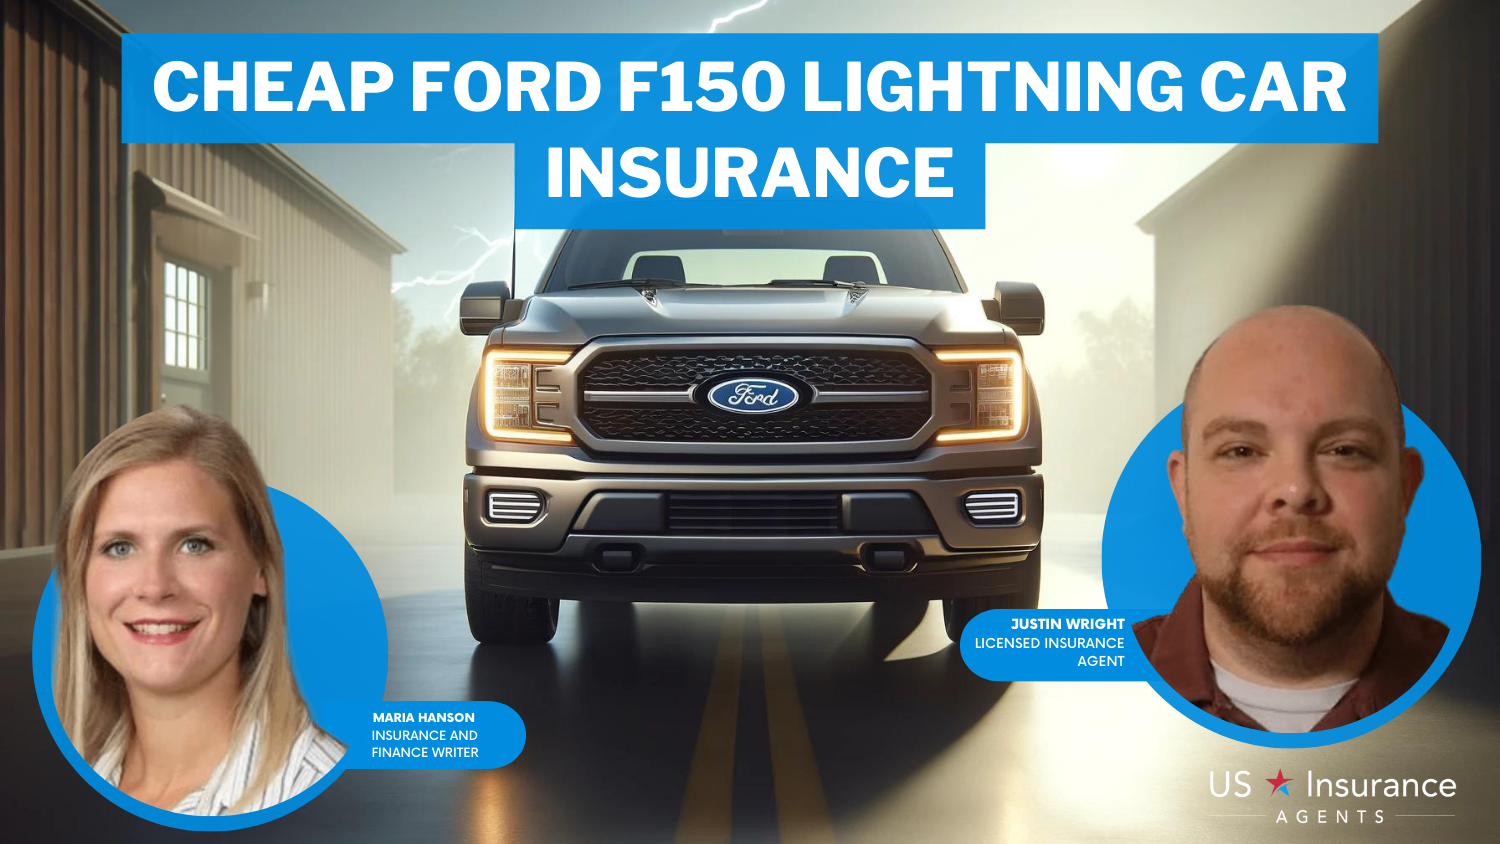 Cheap Ford F150 Lightning Car Insurance: Erie, USAA, and State Farm